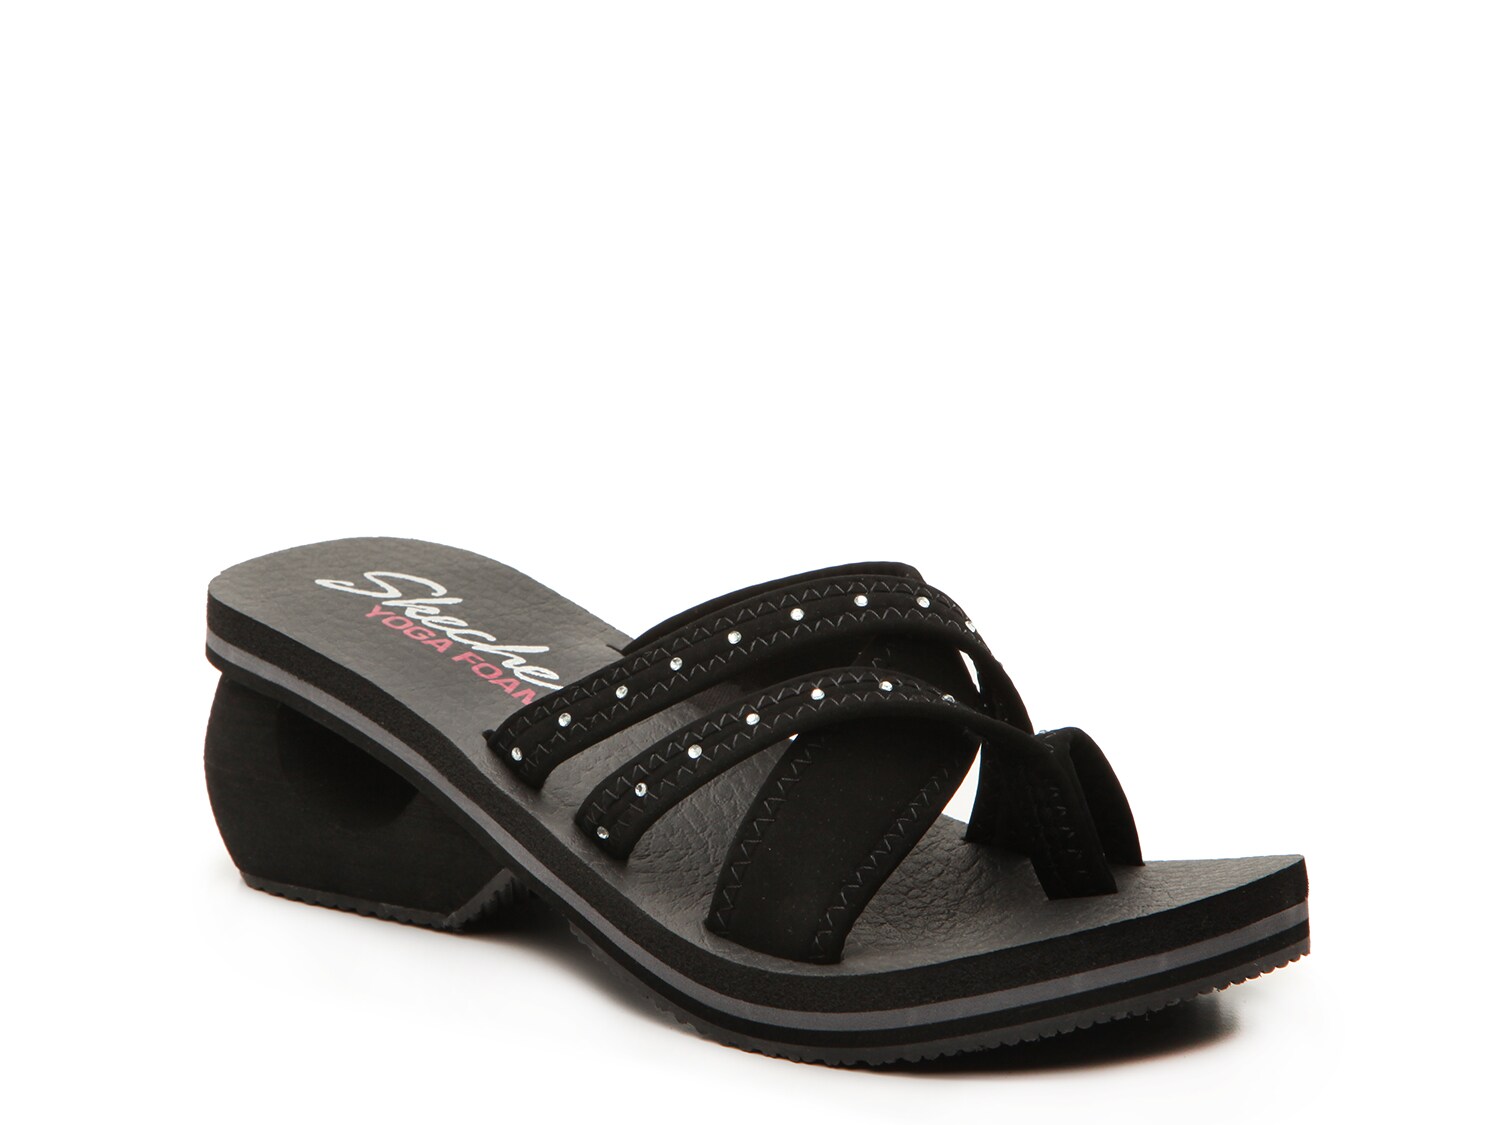 skechers cyclers sandals